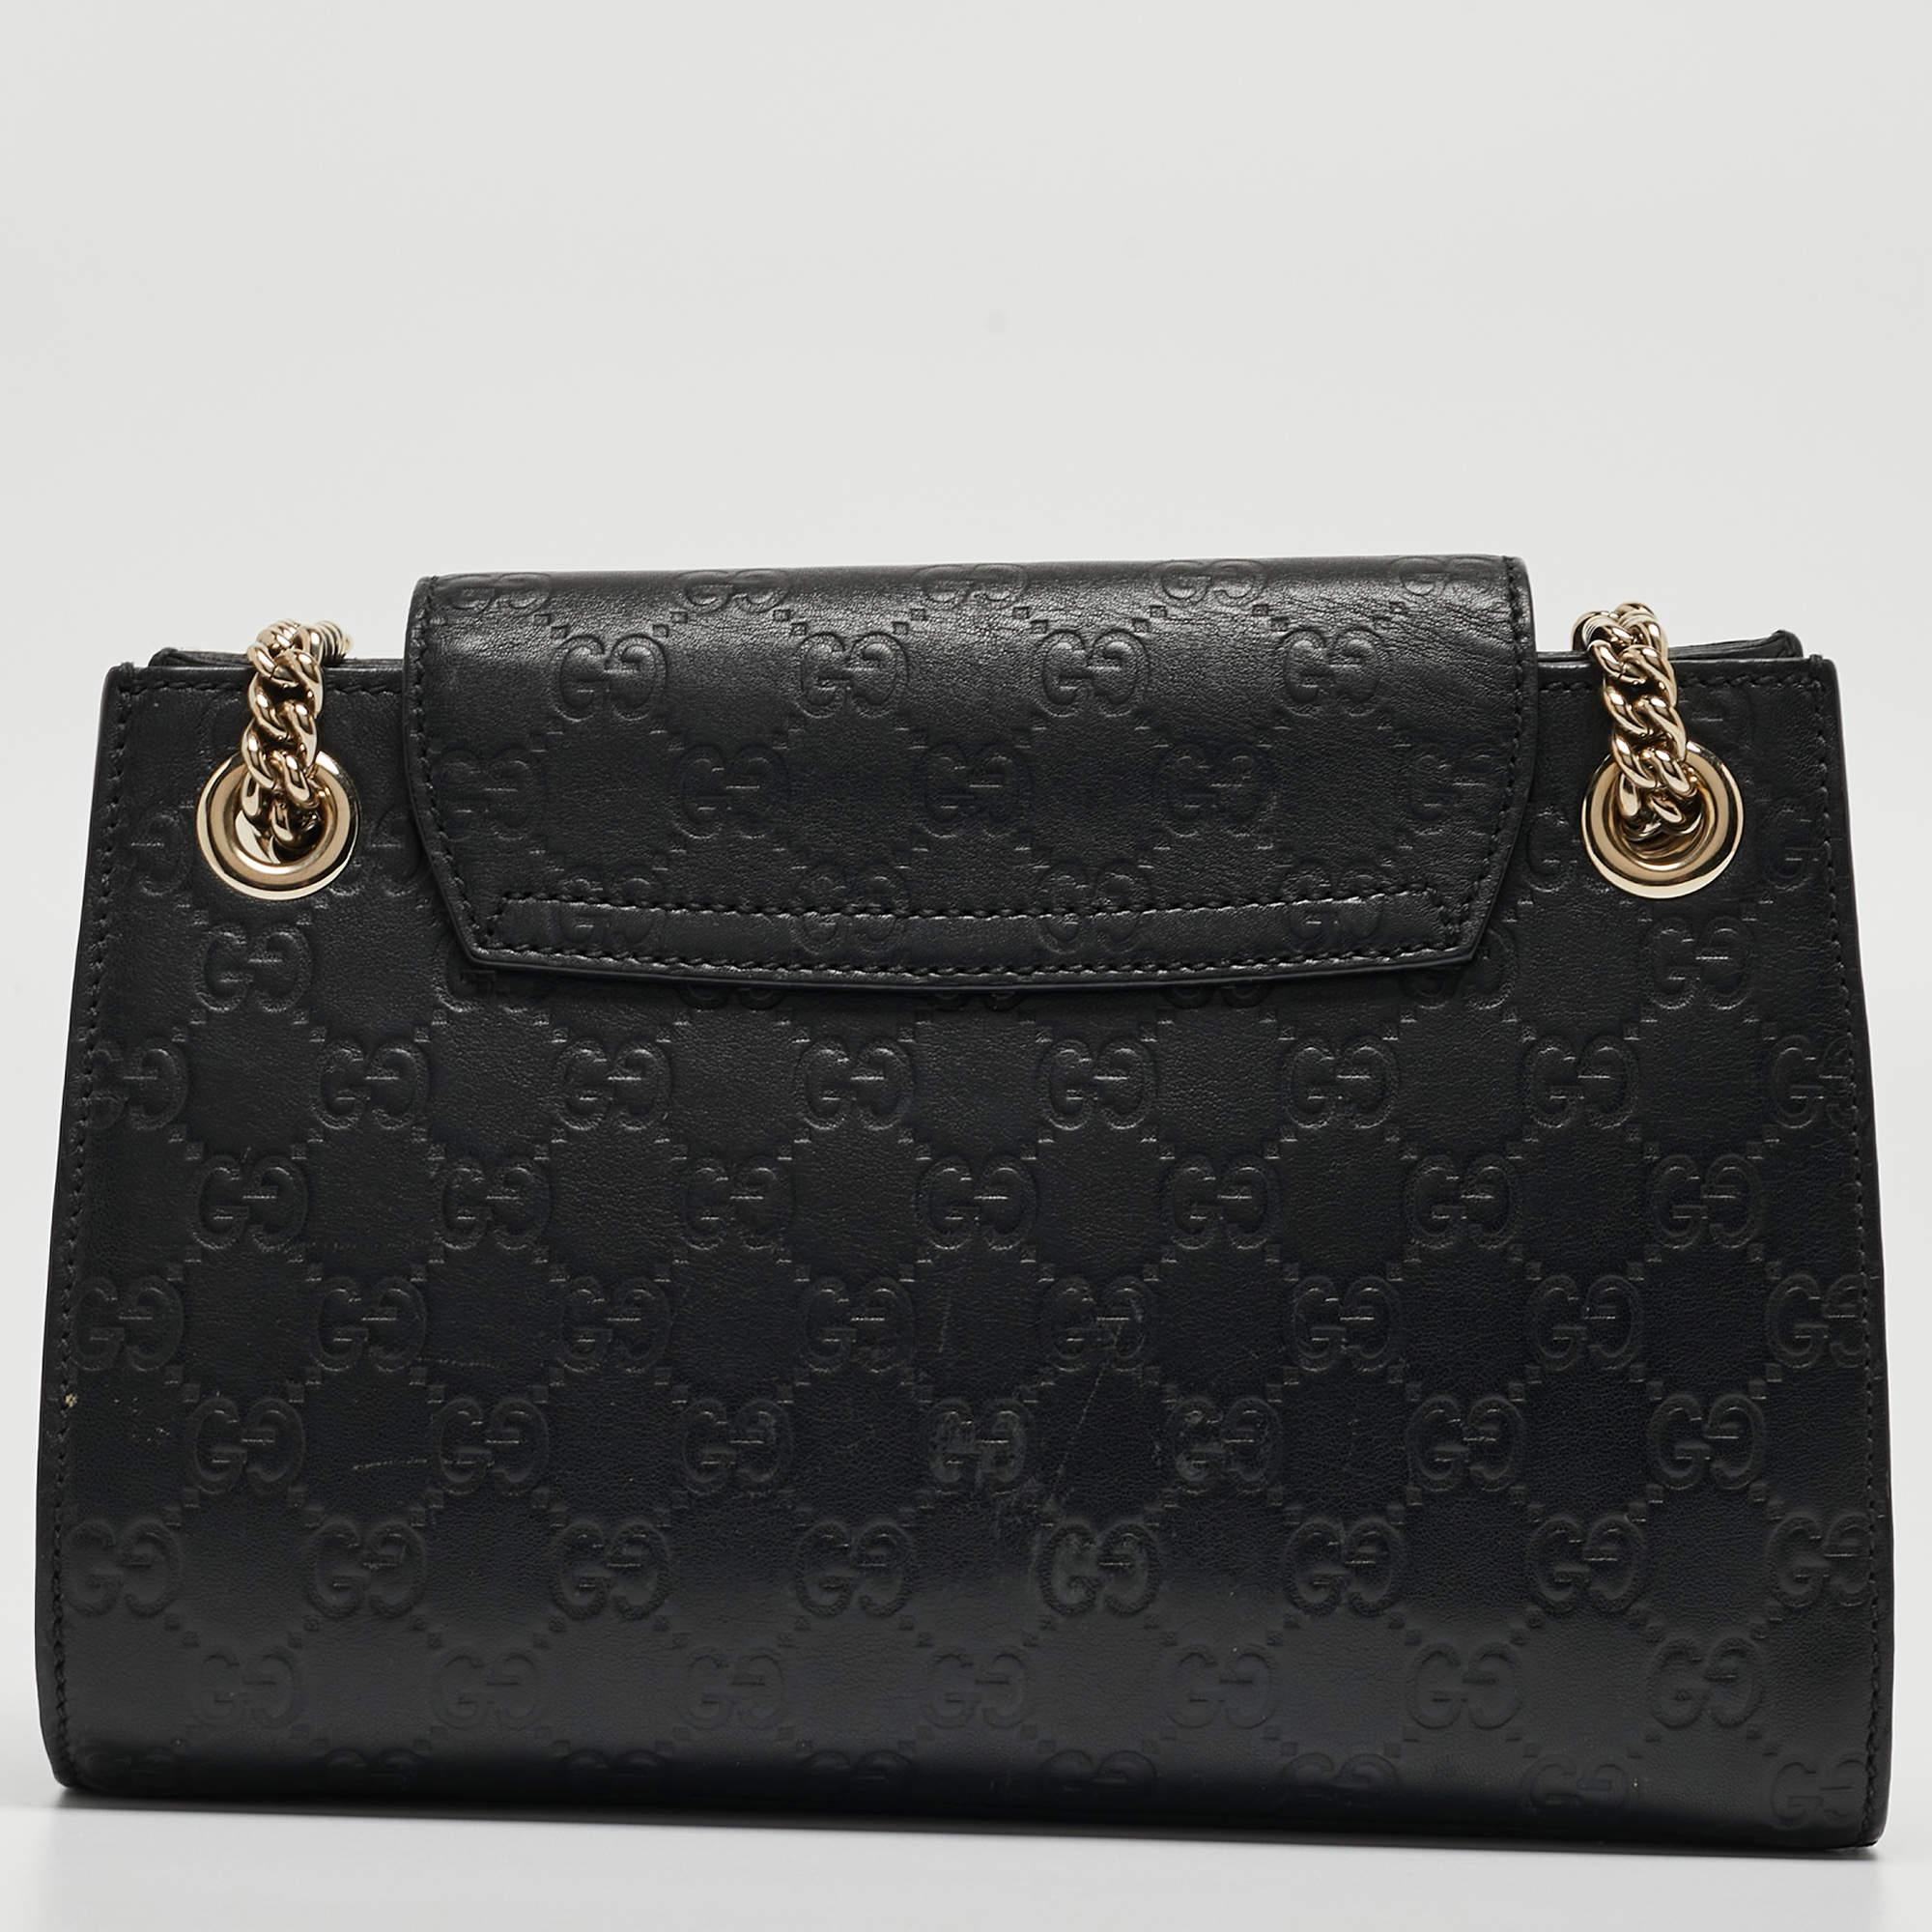 With a perfect blend of archival details and contemporary design, this Gucci Emily bag is desirable. It has impressed the style enthusiasts with its understated charm and embodies an architectural shape. Made from Guccissima leather, it can be